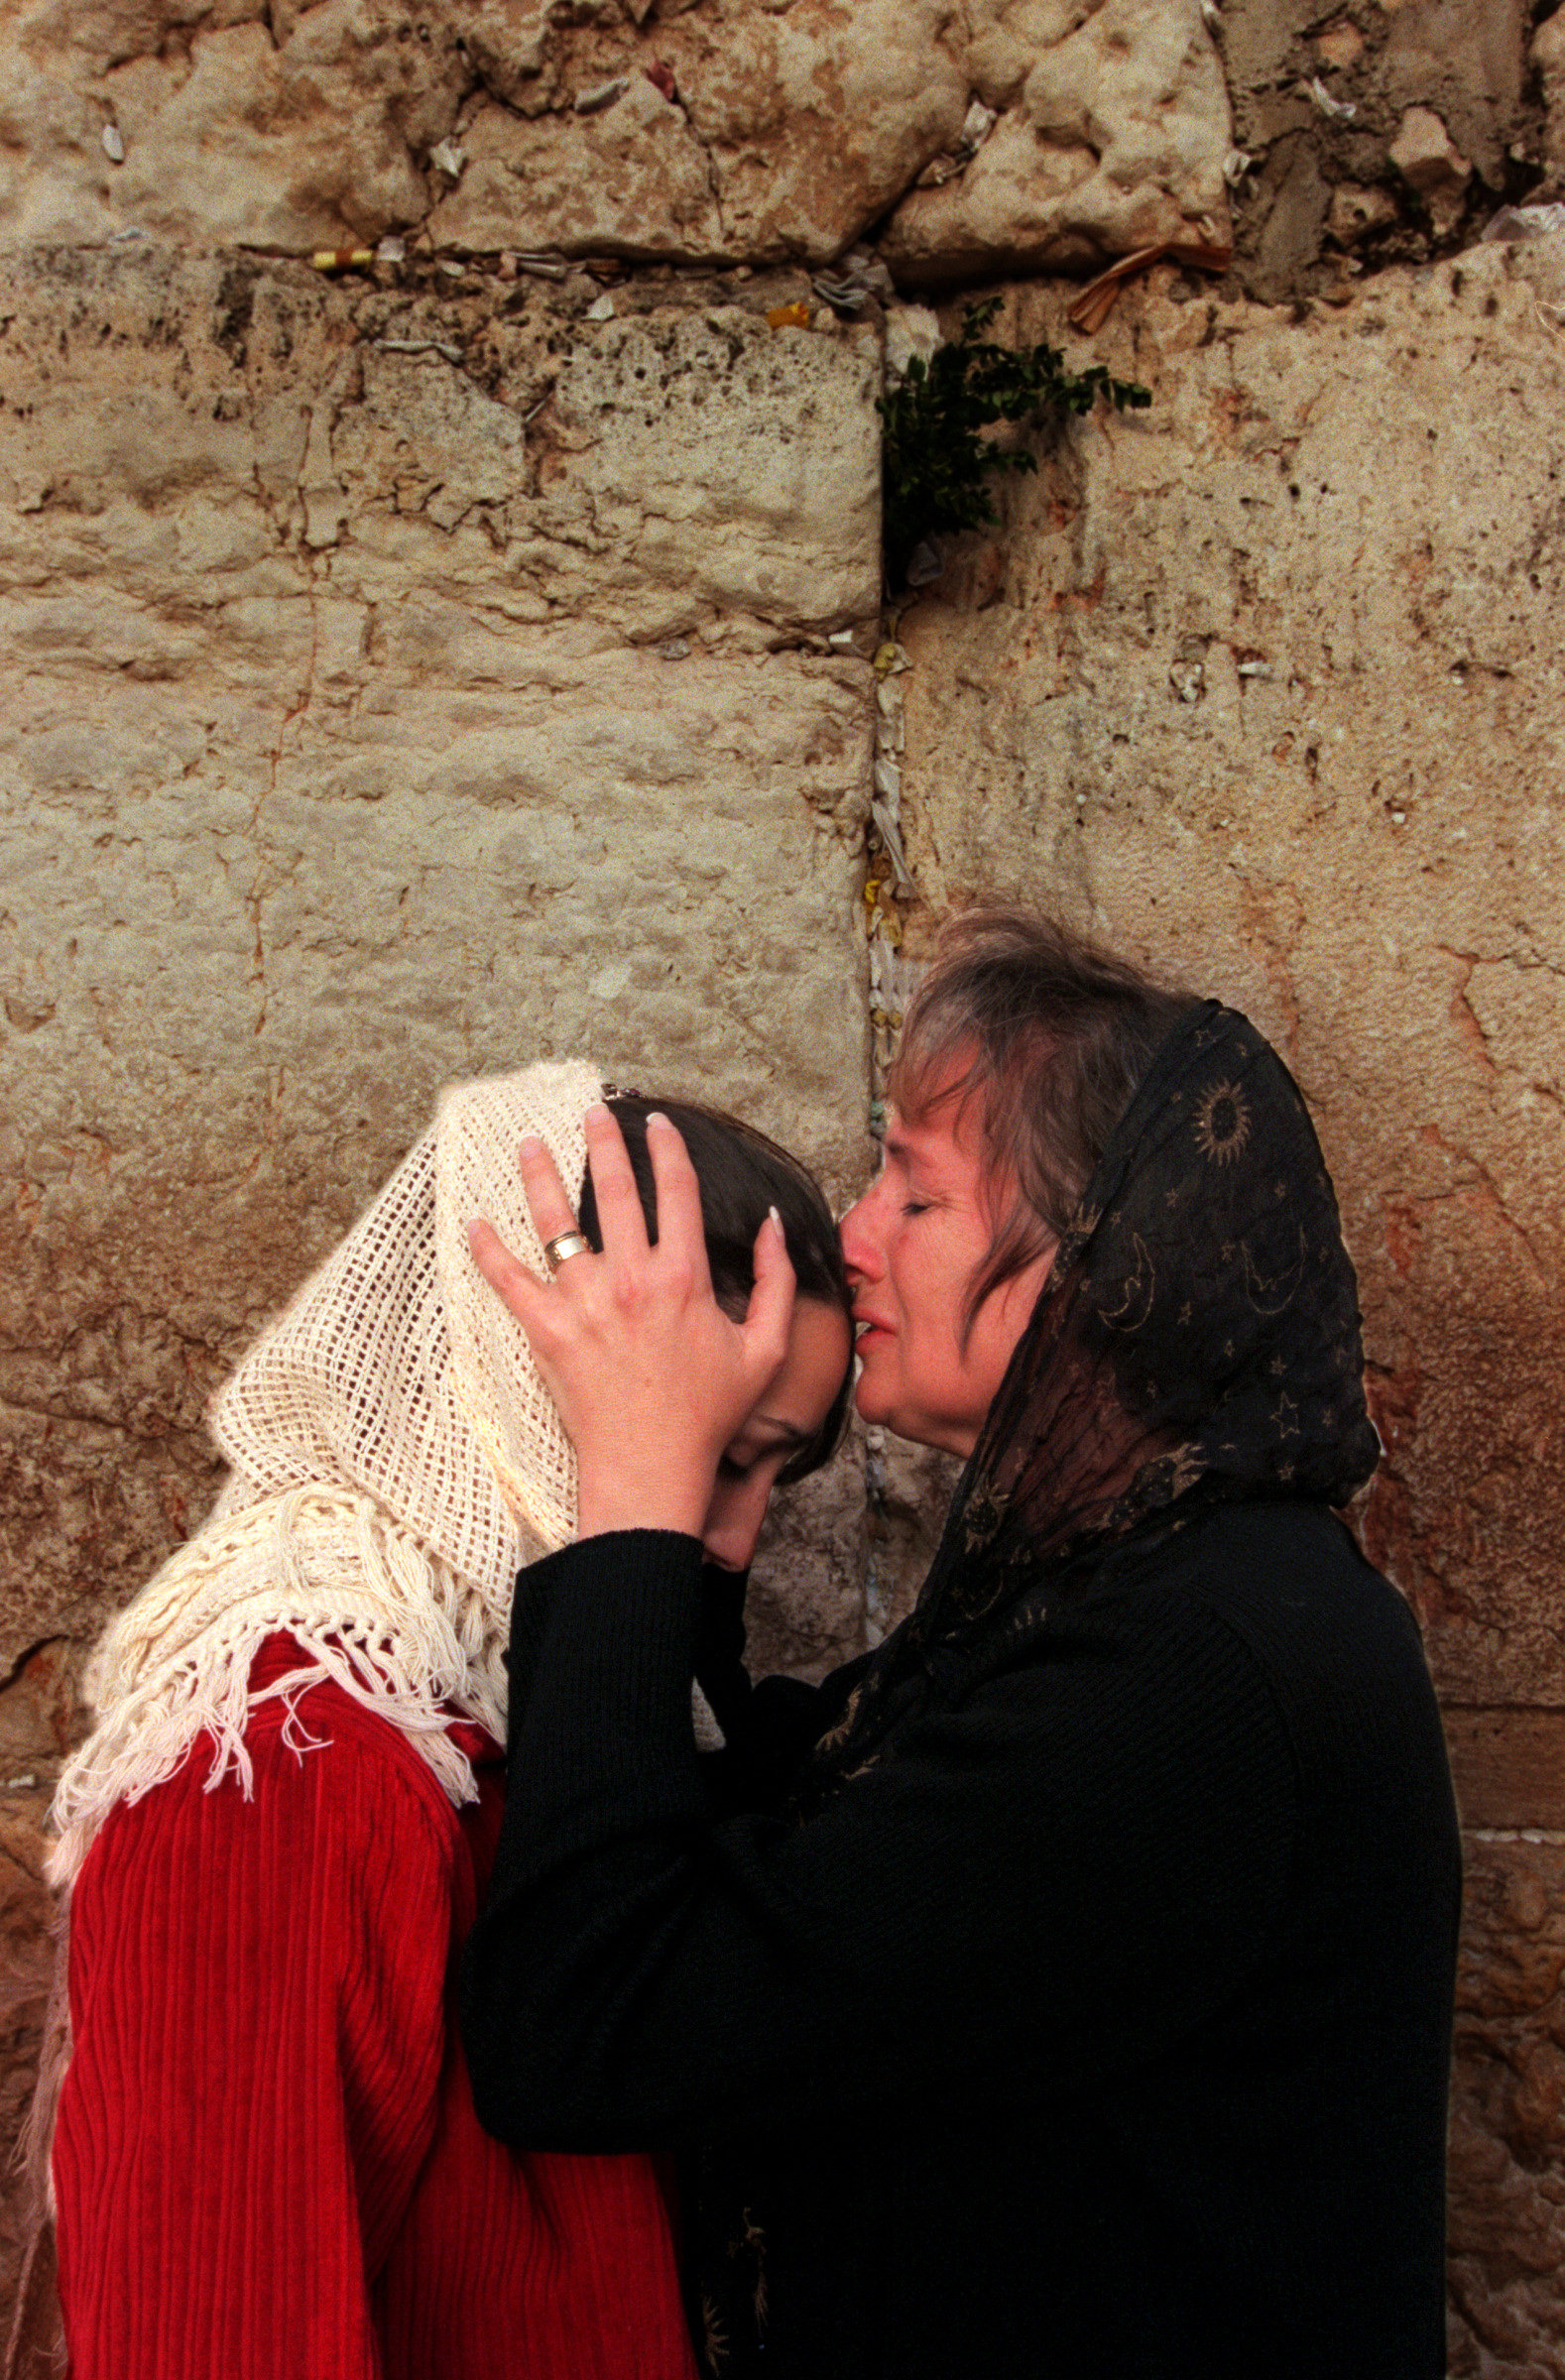  Left, Adeena King and her mother Barbara,&nbsp; over come with emotion, pray at the Western Wailing Wall, in Old City Jerusalem, one of the most Holy sites in Judaism.&nbsp;©Gail Fisher Los Angeles Times 